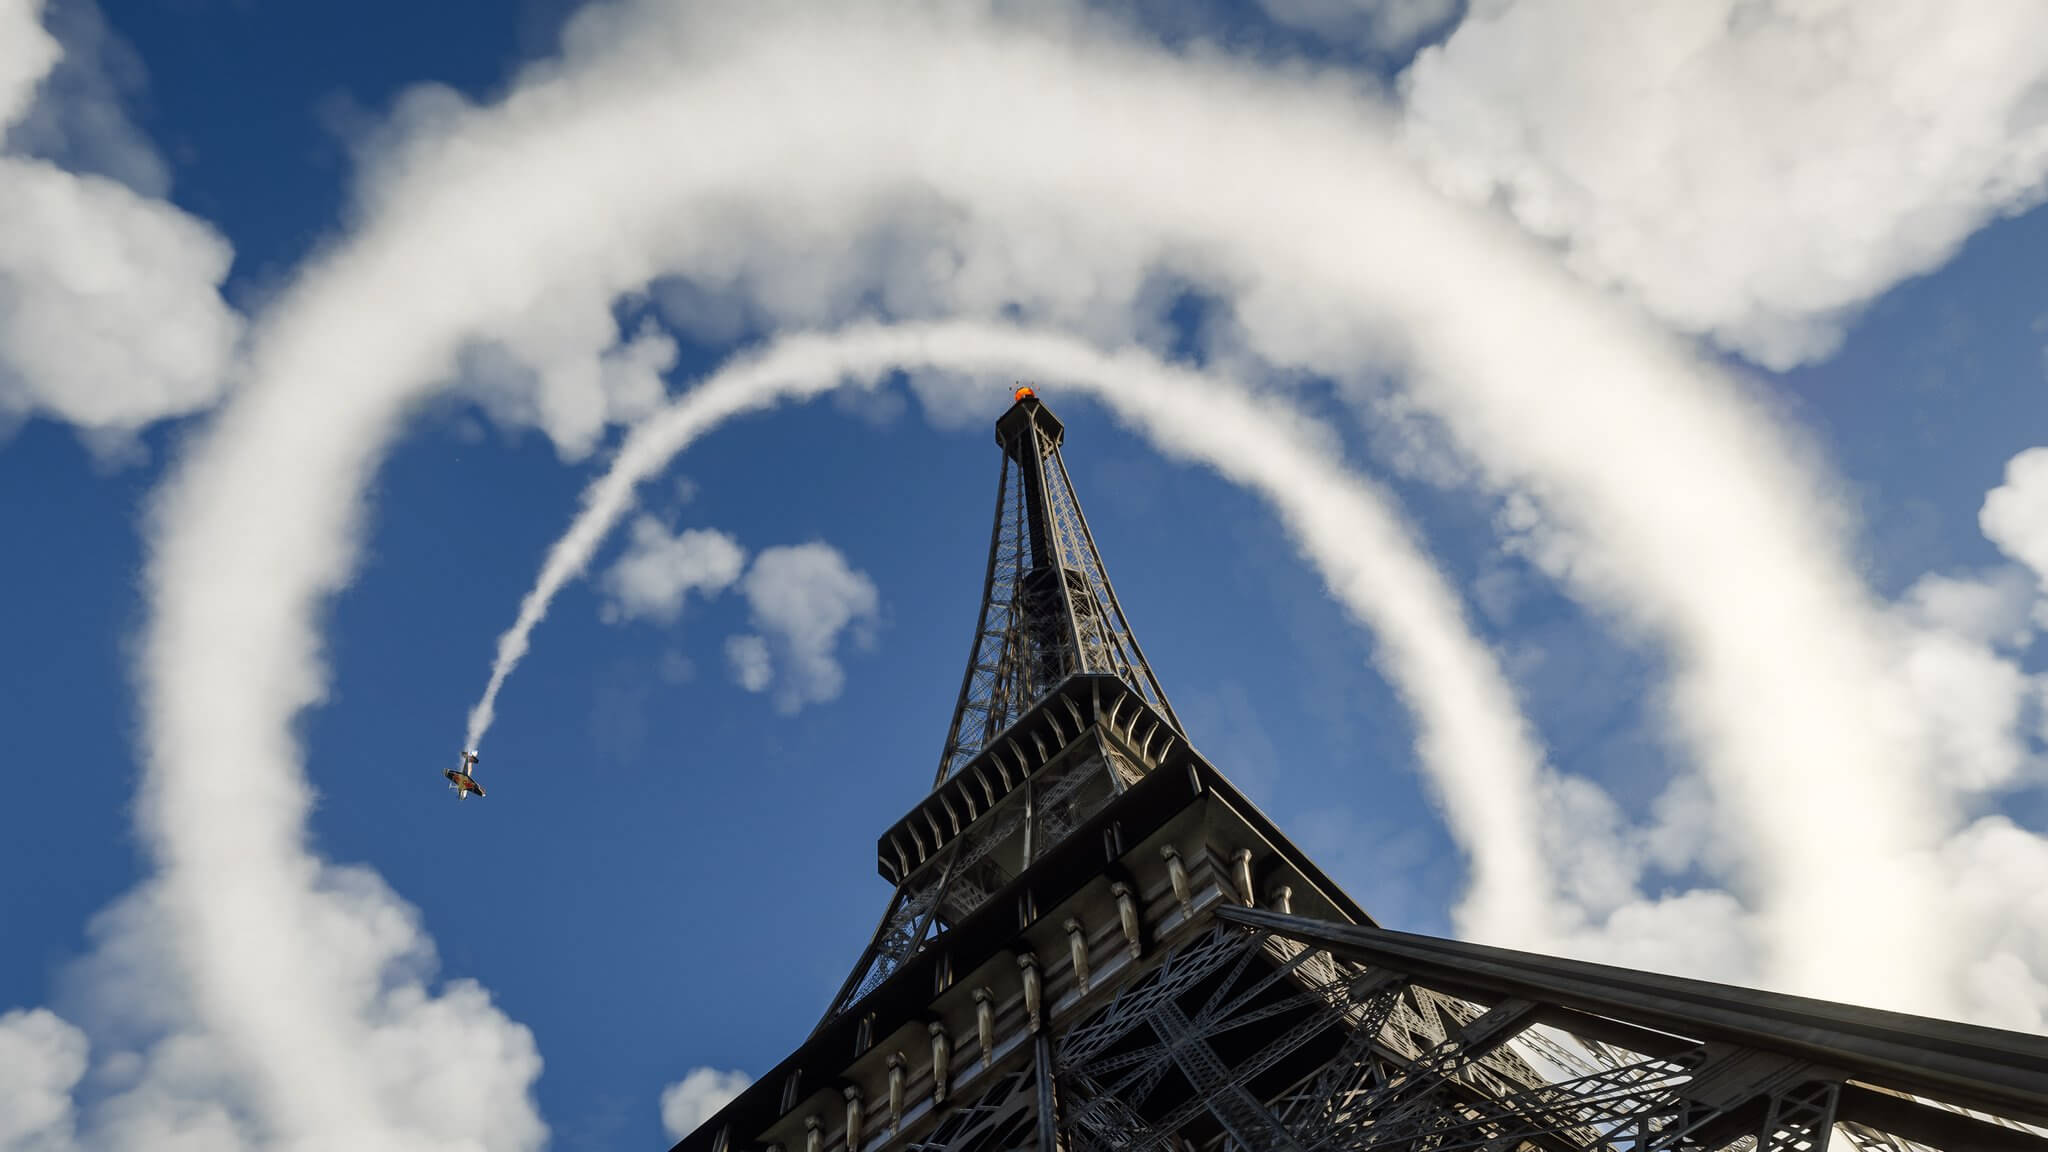 An Extra 330LT with aerobatic smoke turned on flies in a spiral pattern around the Eiffel Tower.